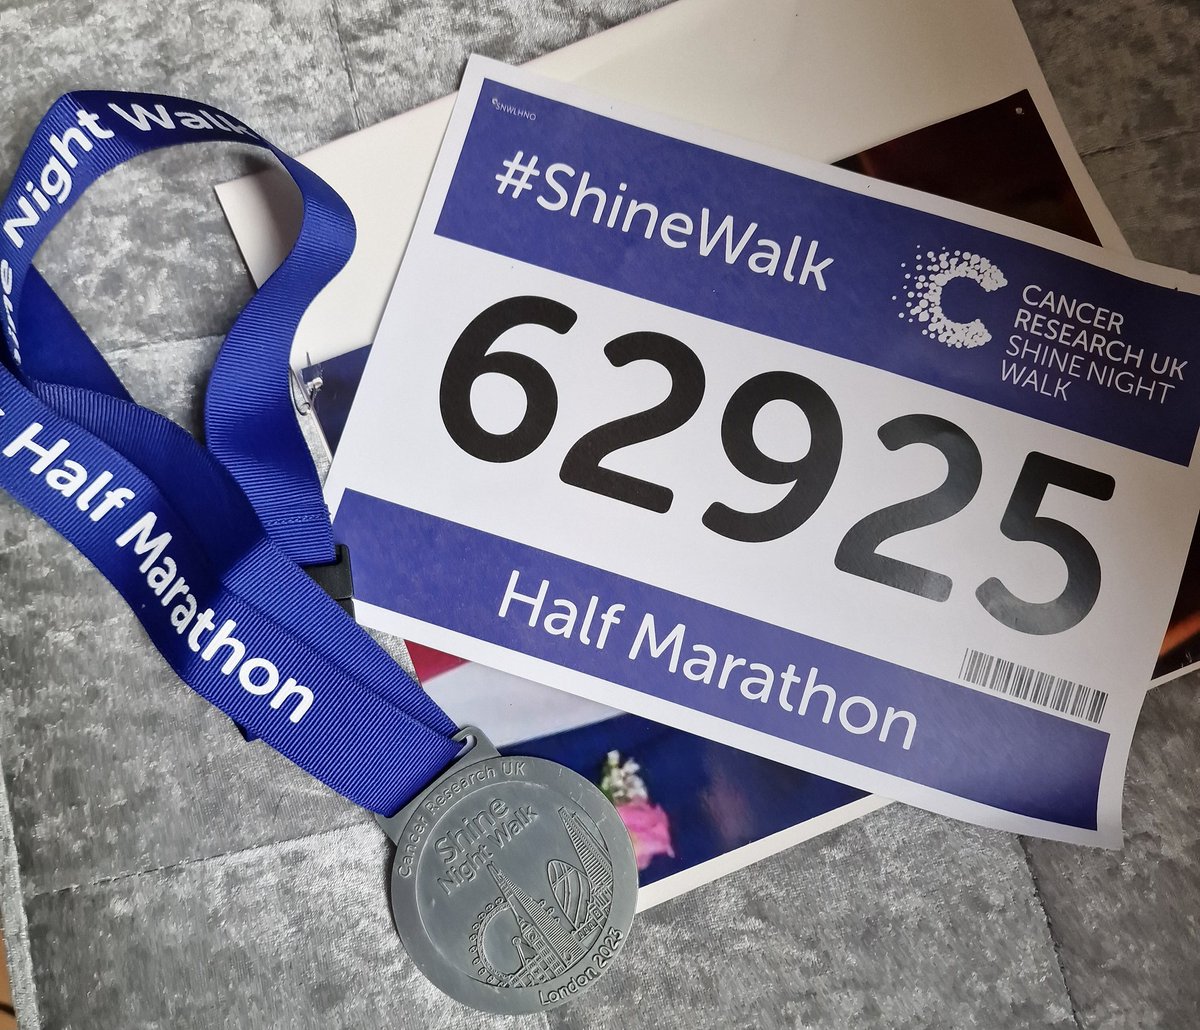 Taken me a day to recover, only just looked at medal 💪🏻💙❤️ @CR_UK #shinewalk #CancerResearch #CancerAwareness